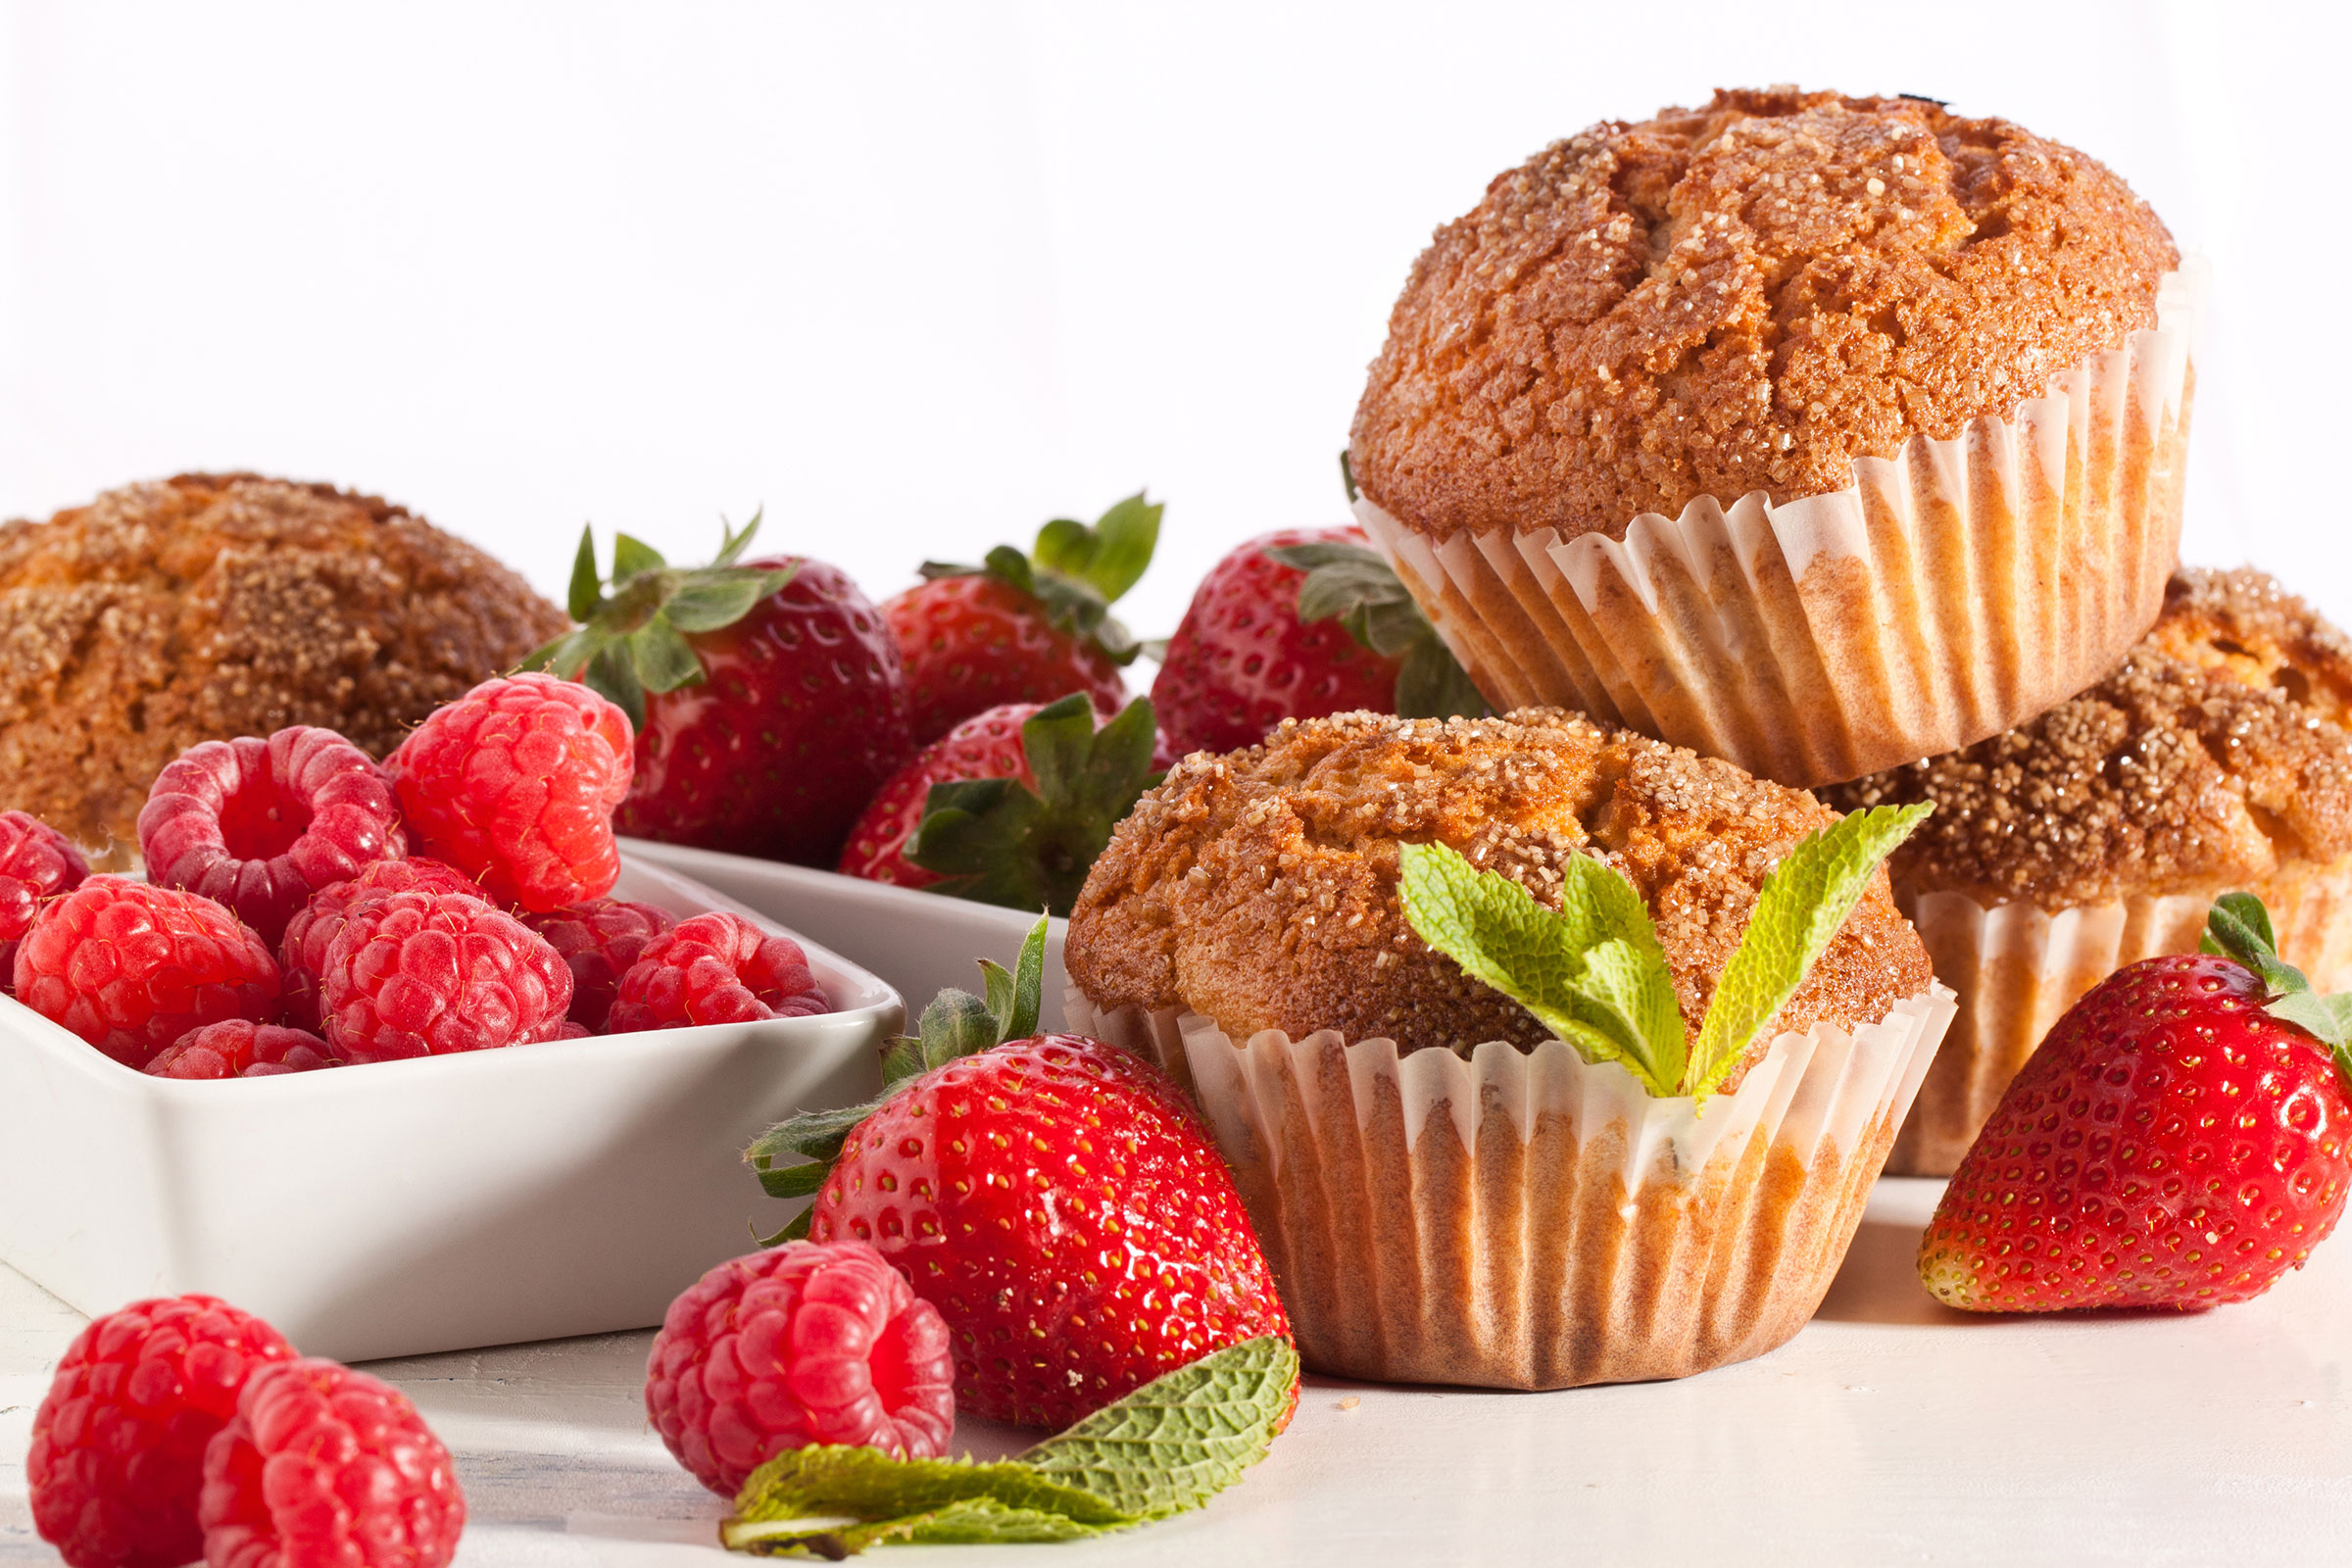 muffins-and-berries